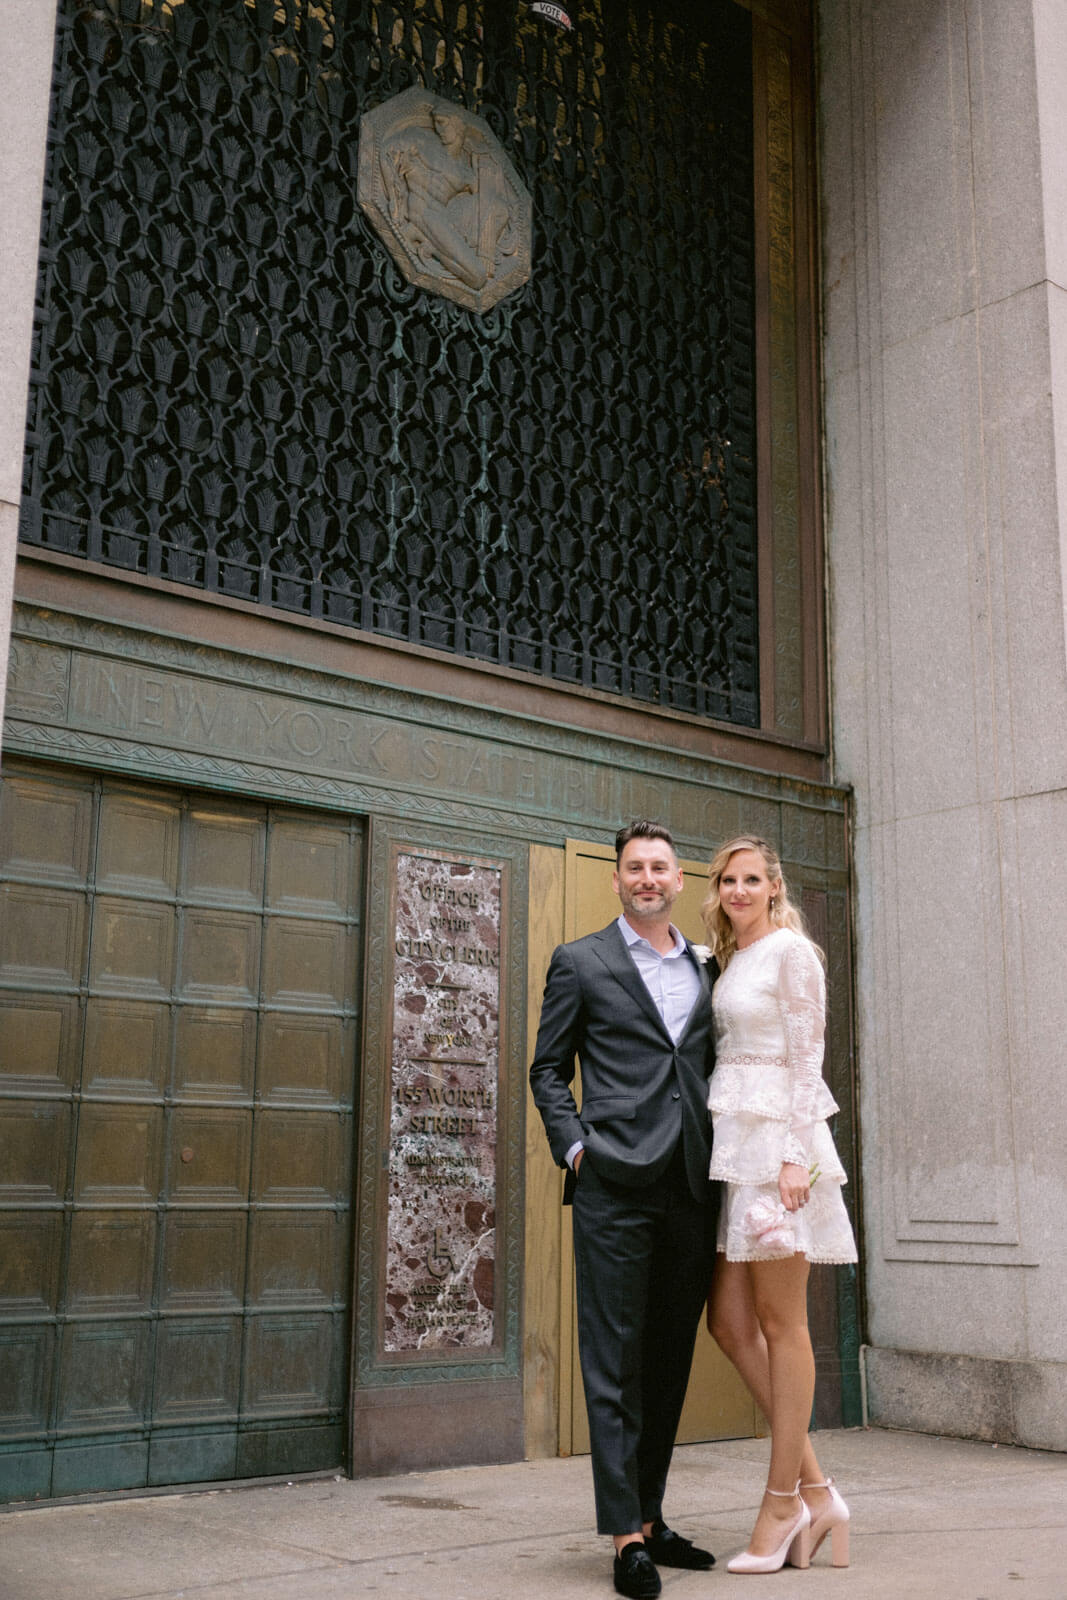 The bride and the groom are standing in front if the New York State Building.